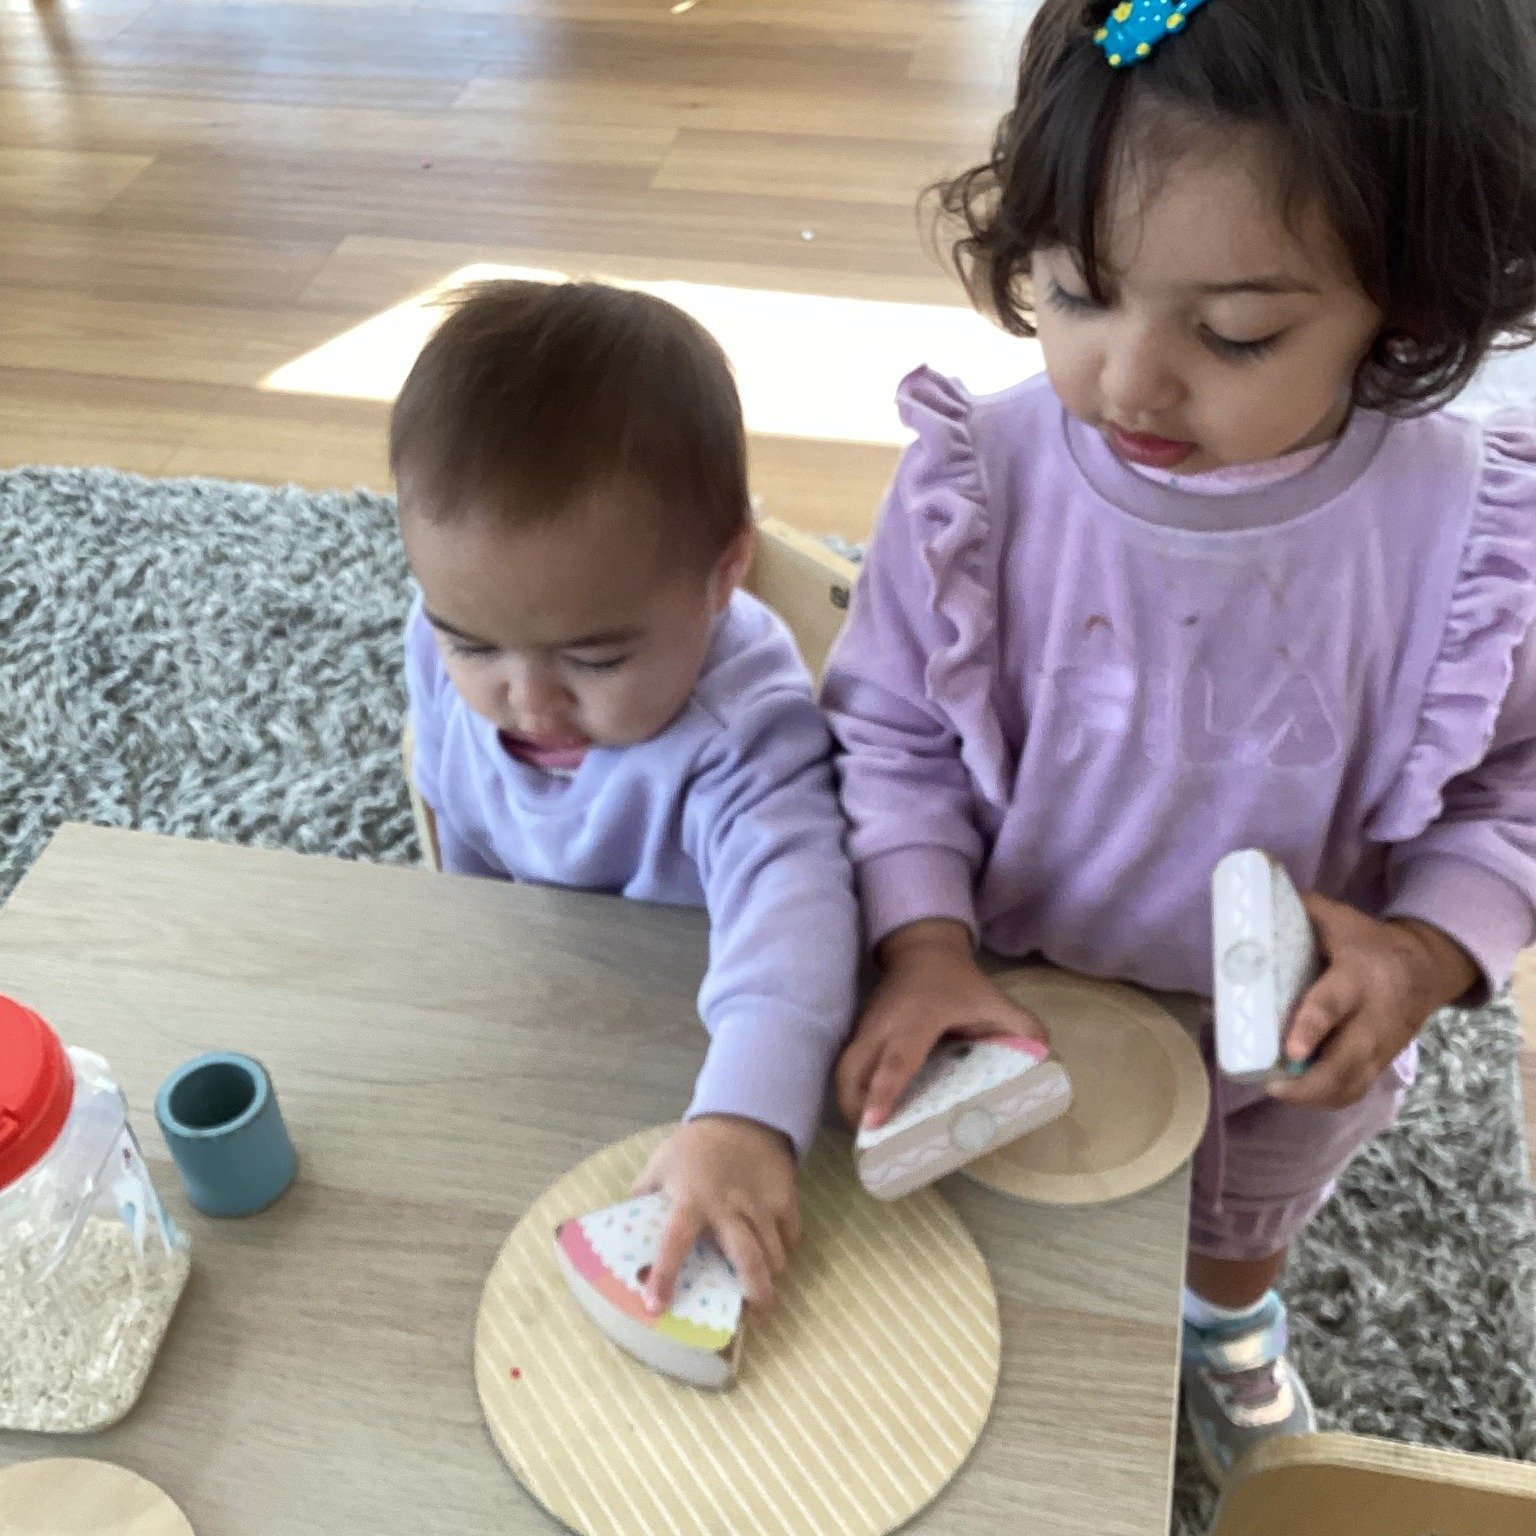 🏠👶 Sparking Imagination and Learning Through Role Play in Our Home Corner! 🍰🍳

It's a joyous sight in our toddler room as little ones immerse themselves in imaginative play at our home corner! 🌟 From feeding baby dolls delicious cake to whipping